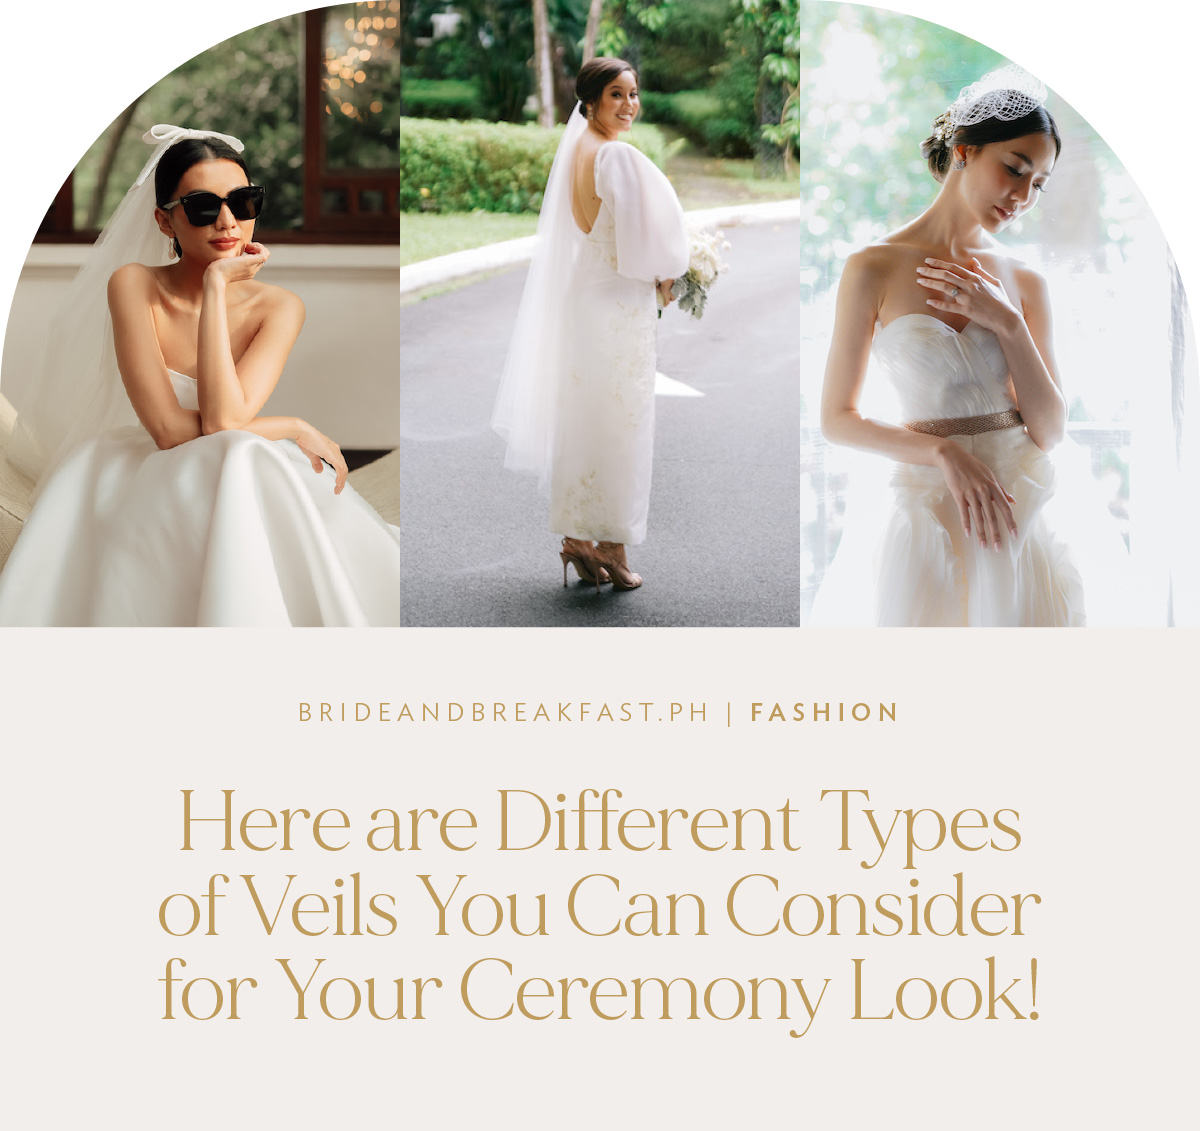 Here are Different Types of Veils You Can Consider for Your Ceremony Look!